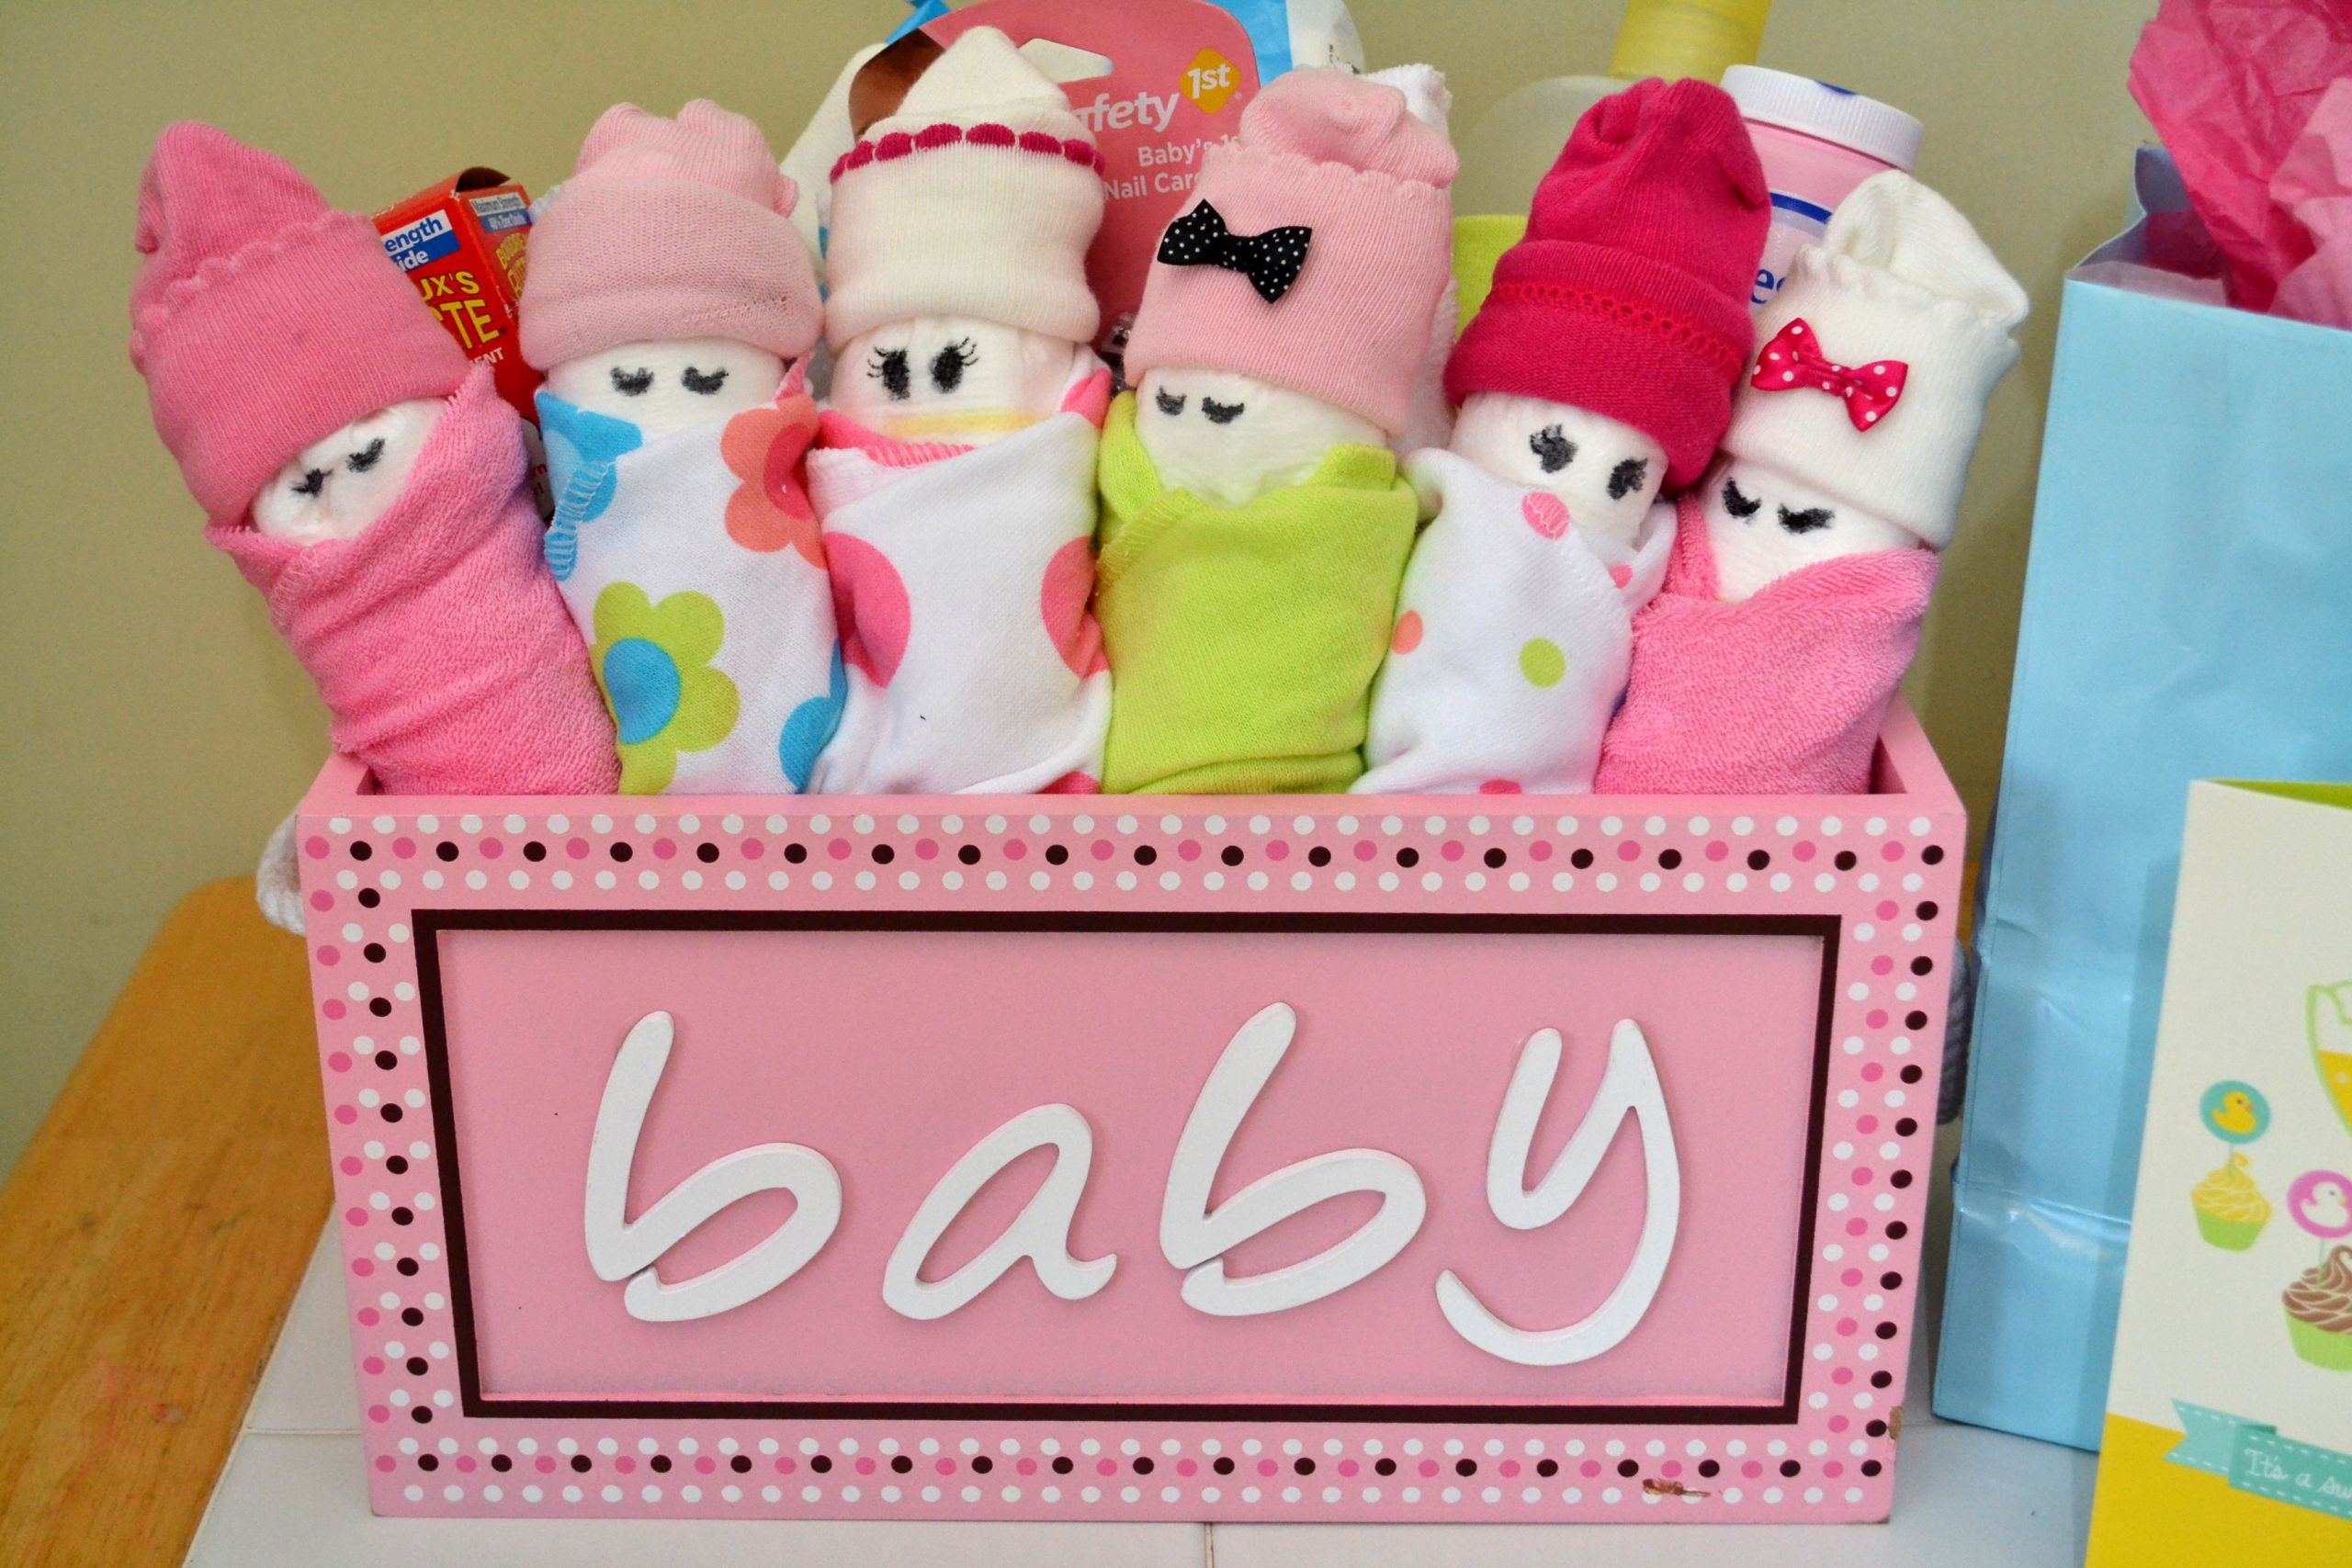 Baby Shower Diy Gift Ideas
 Essential Baby Shower Gifts & DIY Diaper Babies